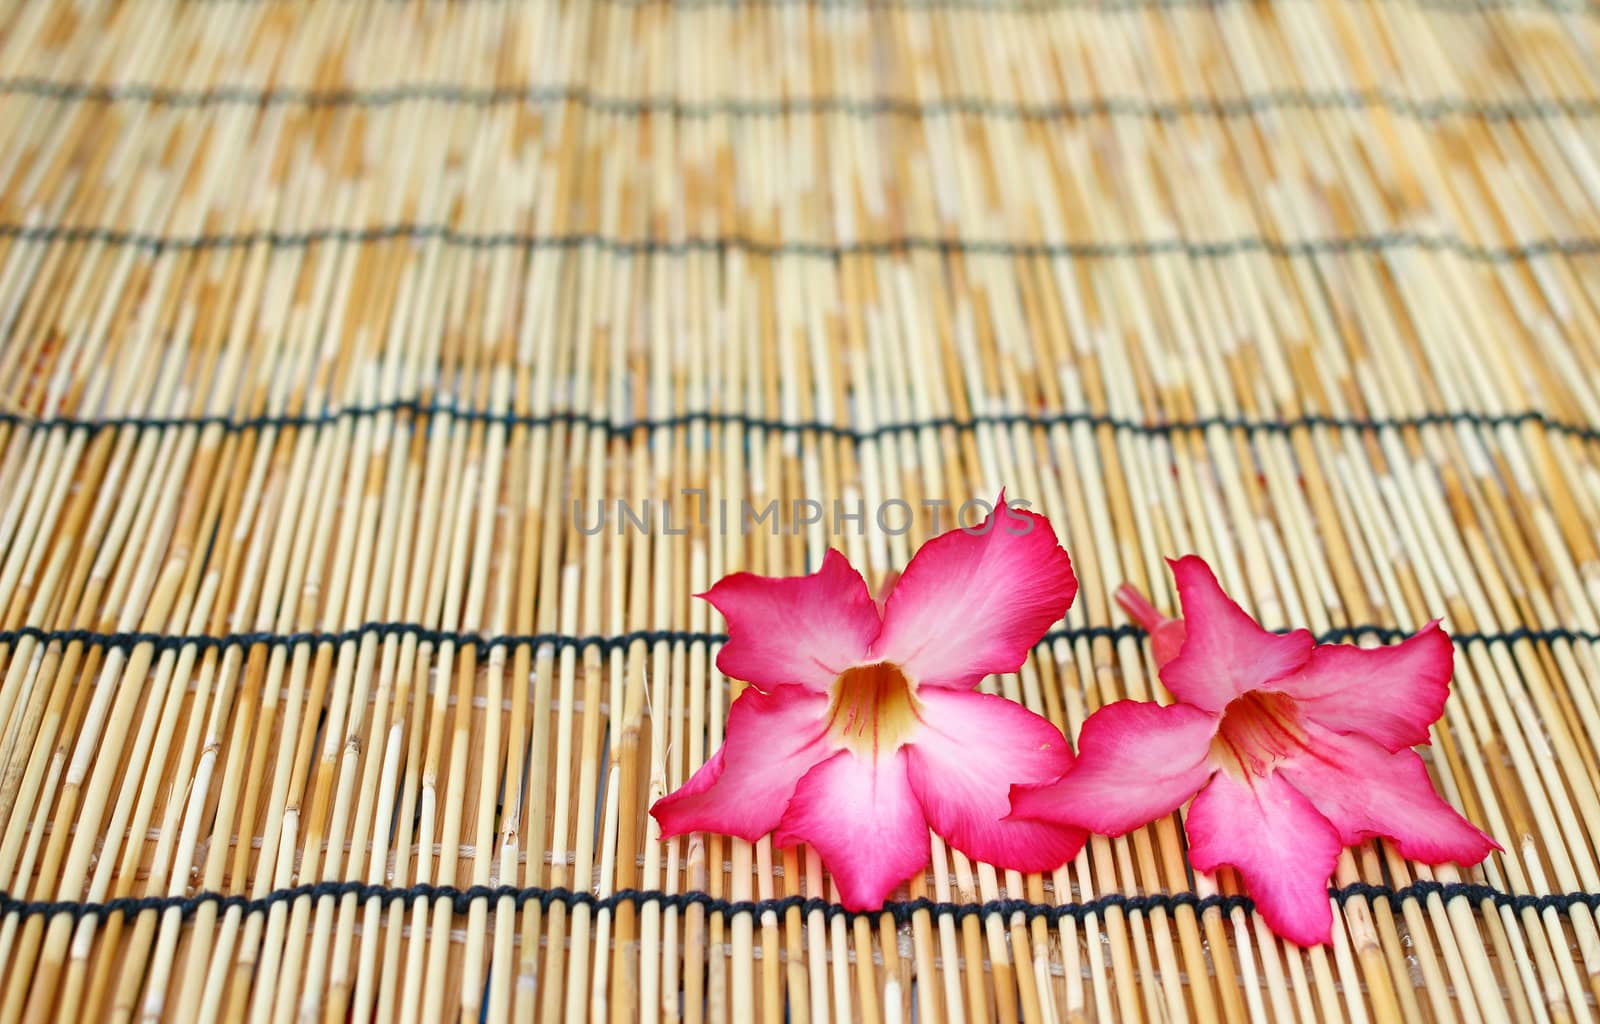 Red impala lily flower on wooden table